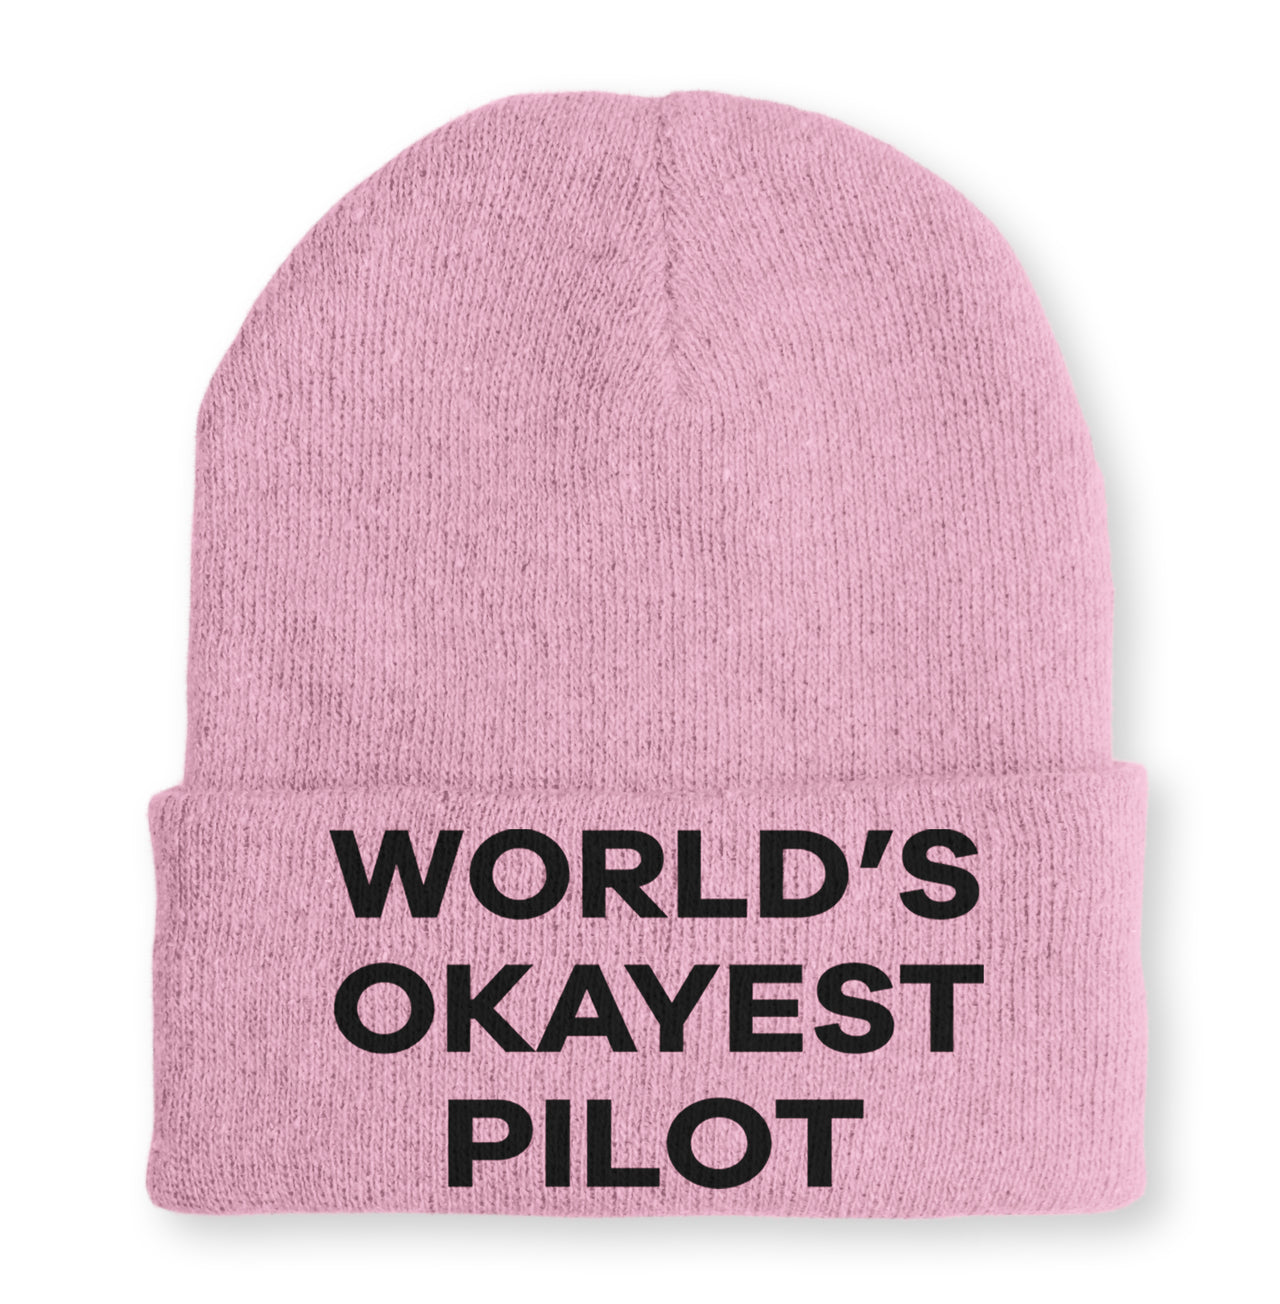 World's Okayest Pilot Embroidered Beanies